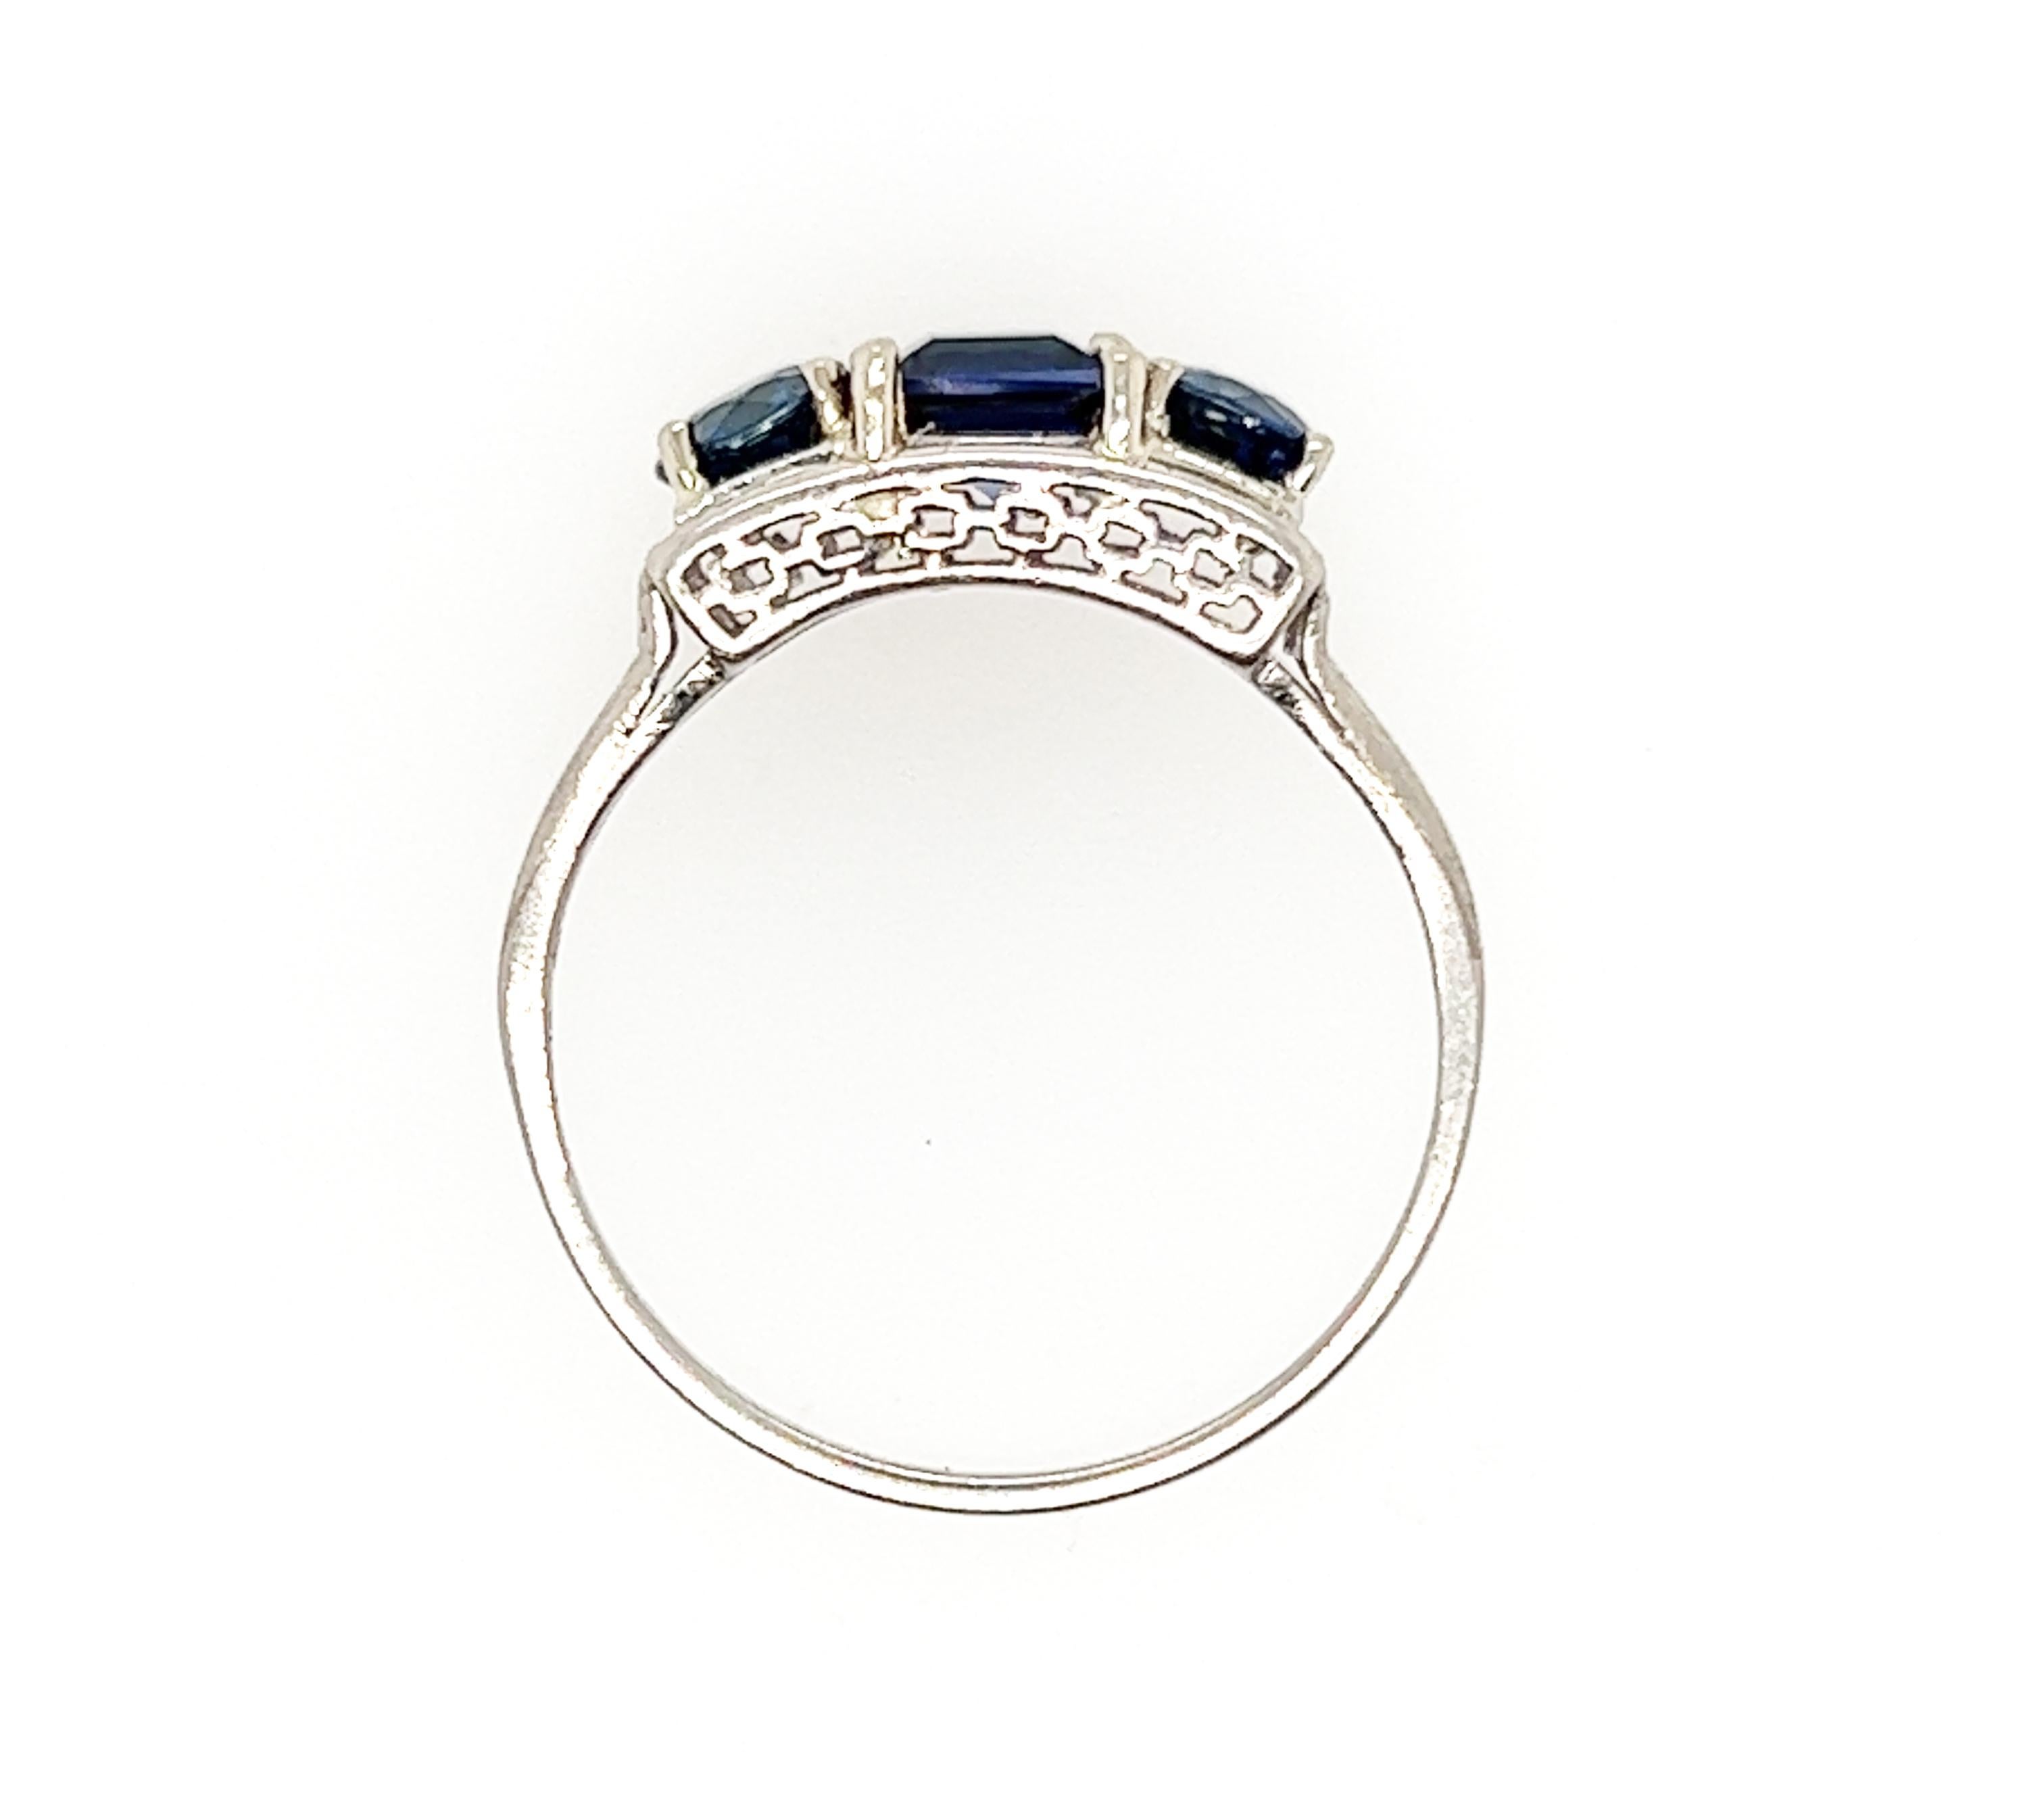 Genuine Original Edwardian Antique from 1900's 3 Stone Sapphire Ring 2.10ct Asscher and Round Cut Platinum  


Features a 1.00ct  Natural Asscher Cut Vibrant Blue Sapphire Center Gemstone 

Accompanied by a Perfect Matching Set of Round Cut